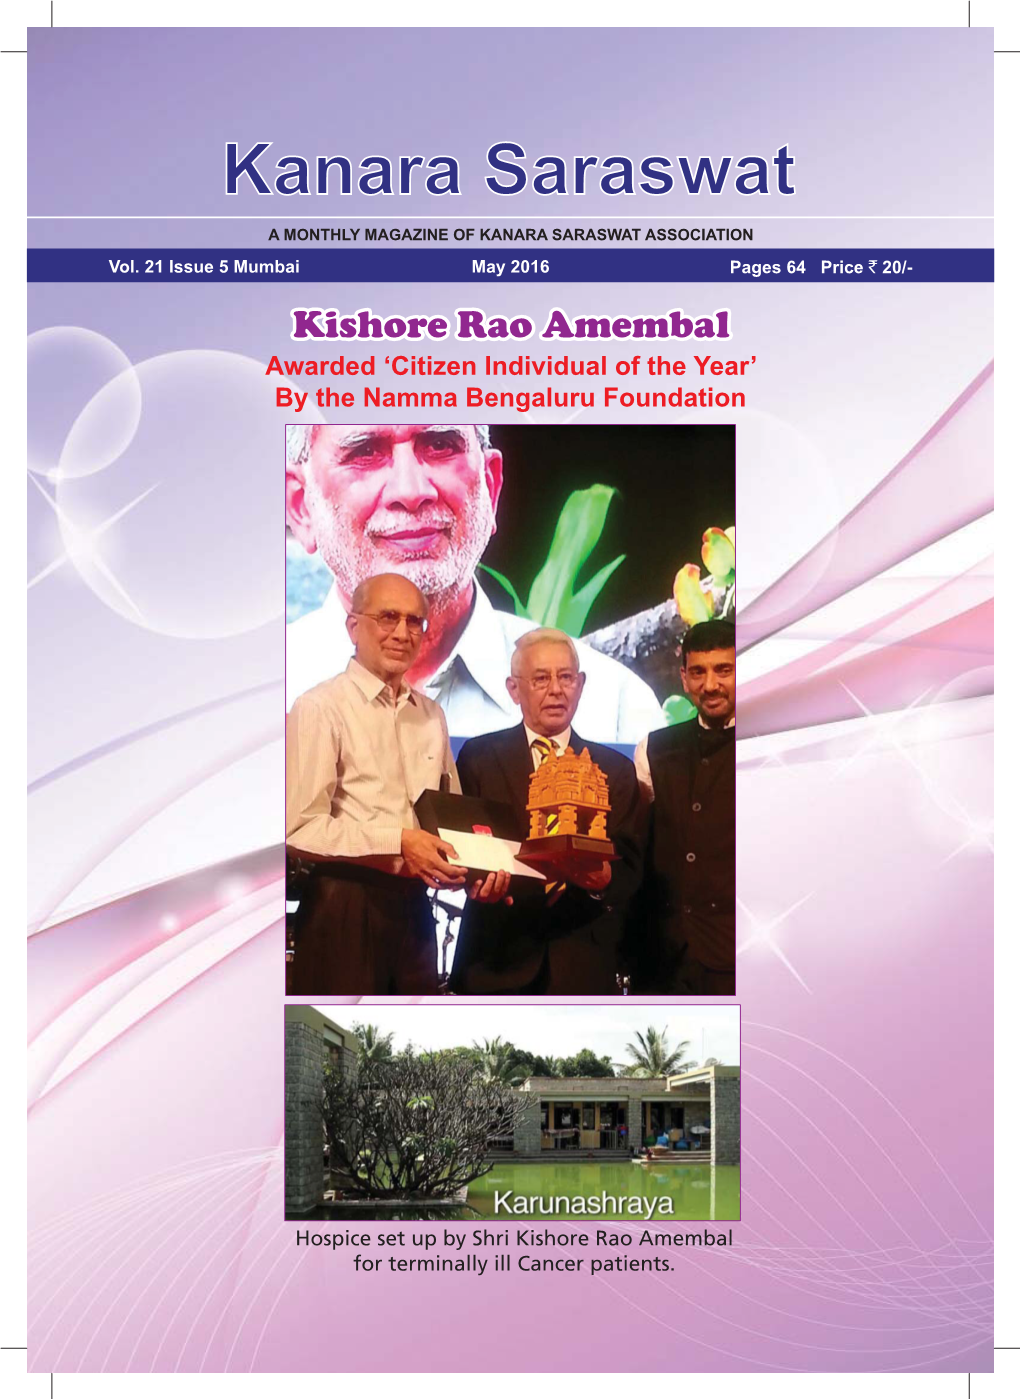 Kishore Rao Amembal Awarded ‘Citizen Individual of the Year’ by the Namma Bengaluru Foundation